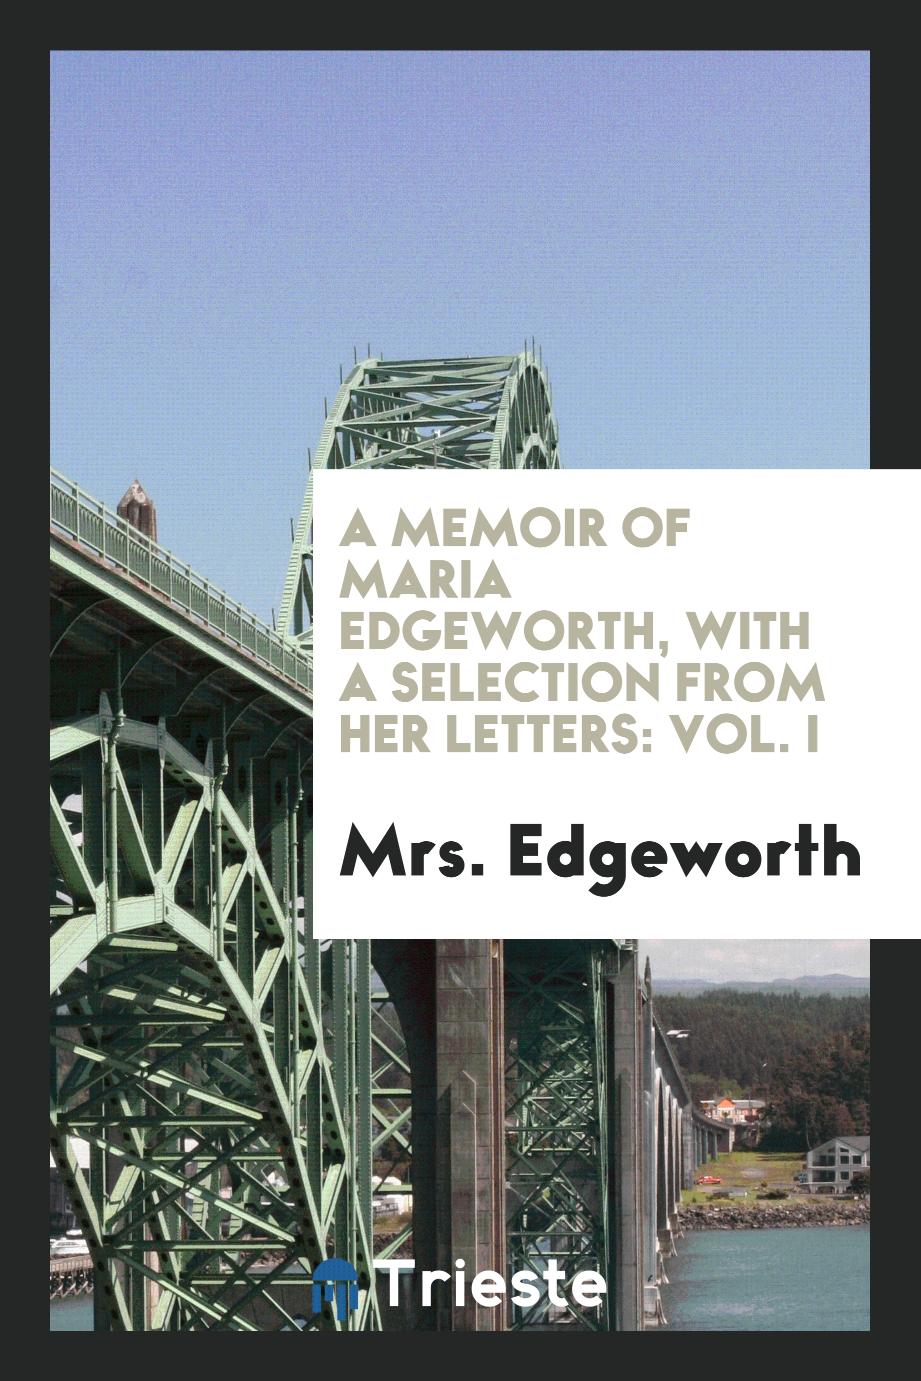 A Memoir of Maria Edgeworth, with a Selection from Her Letters: Vol. I